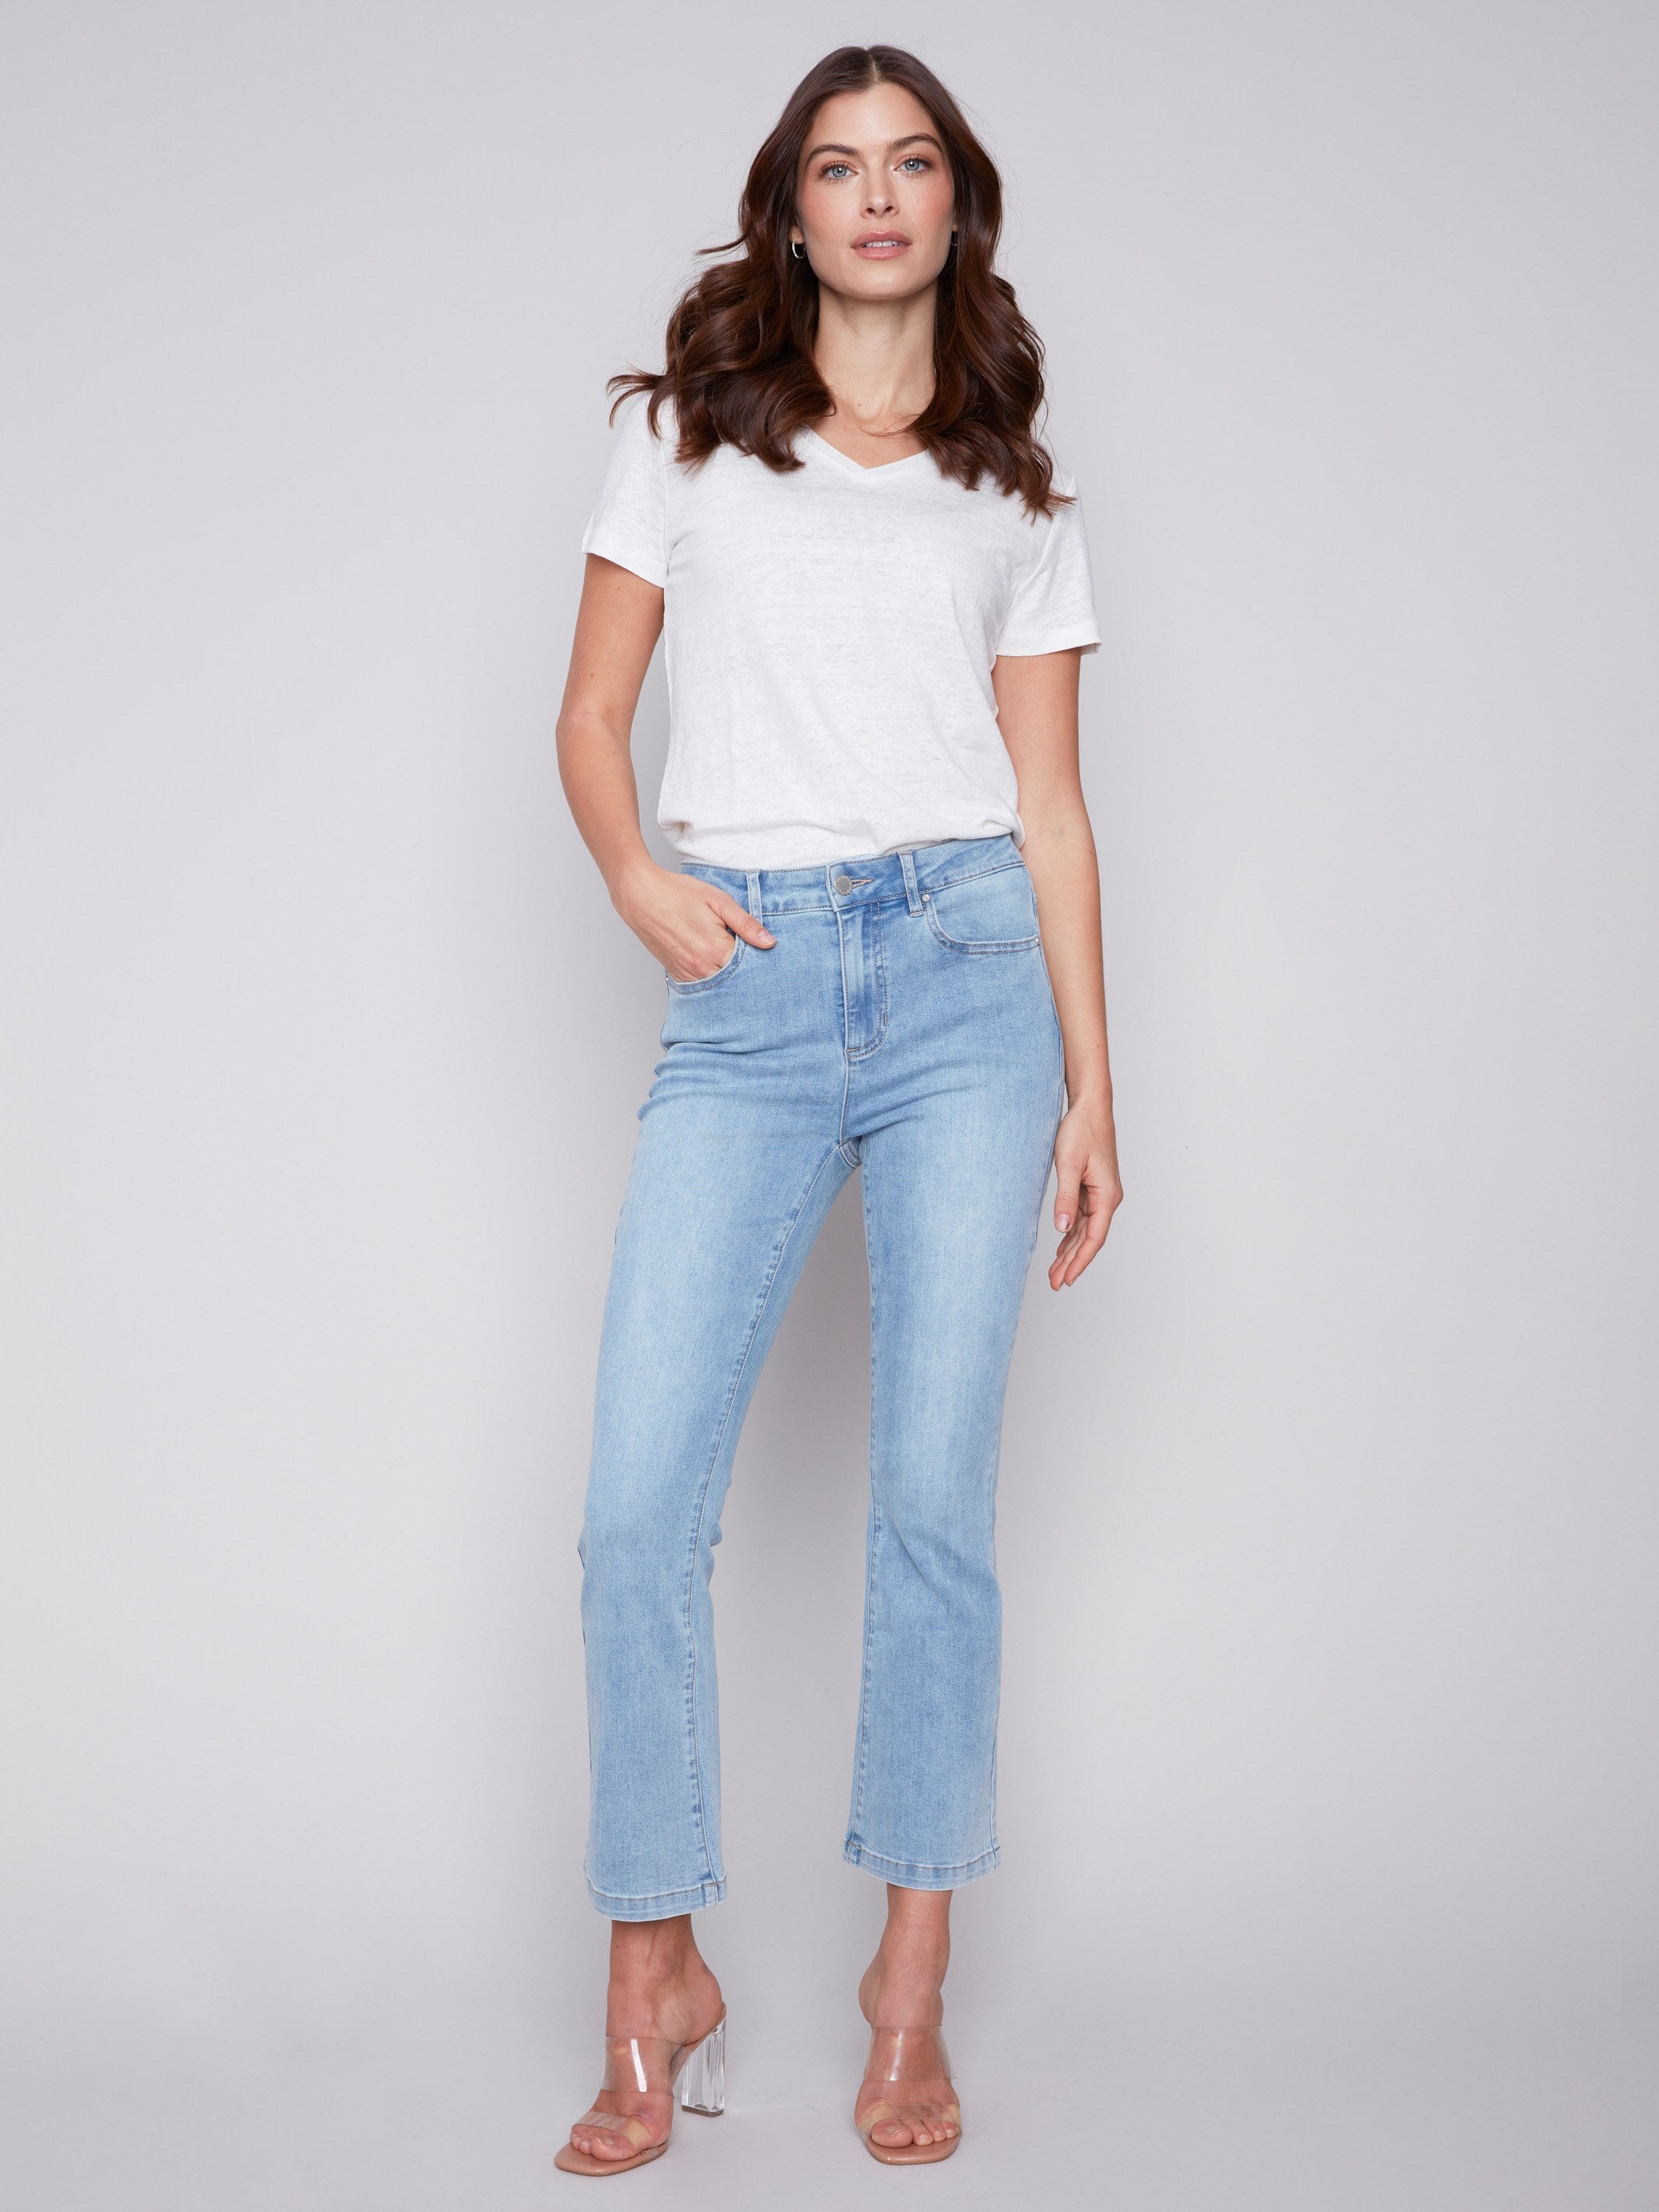 Bootcut Stretch Denim Pants - Light Blue - Charlie B Collection Canada - Image 1